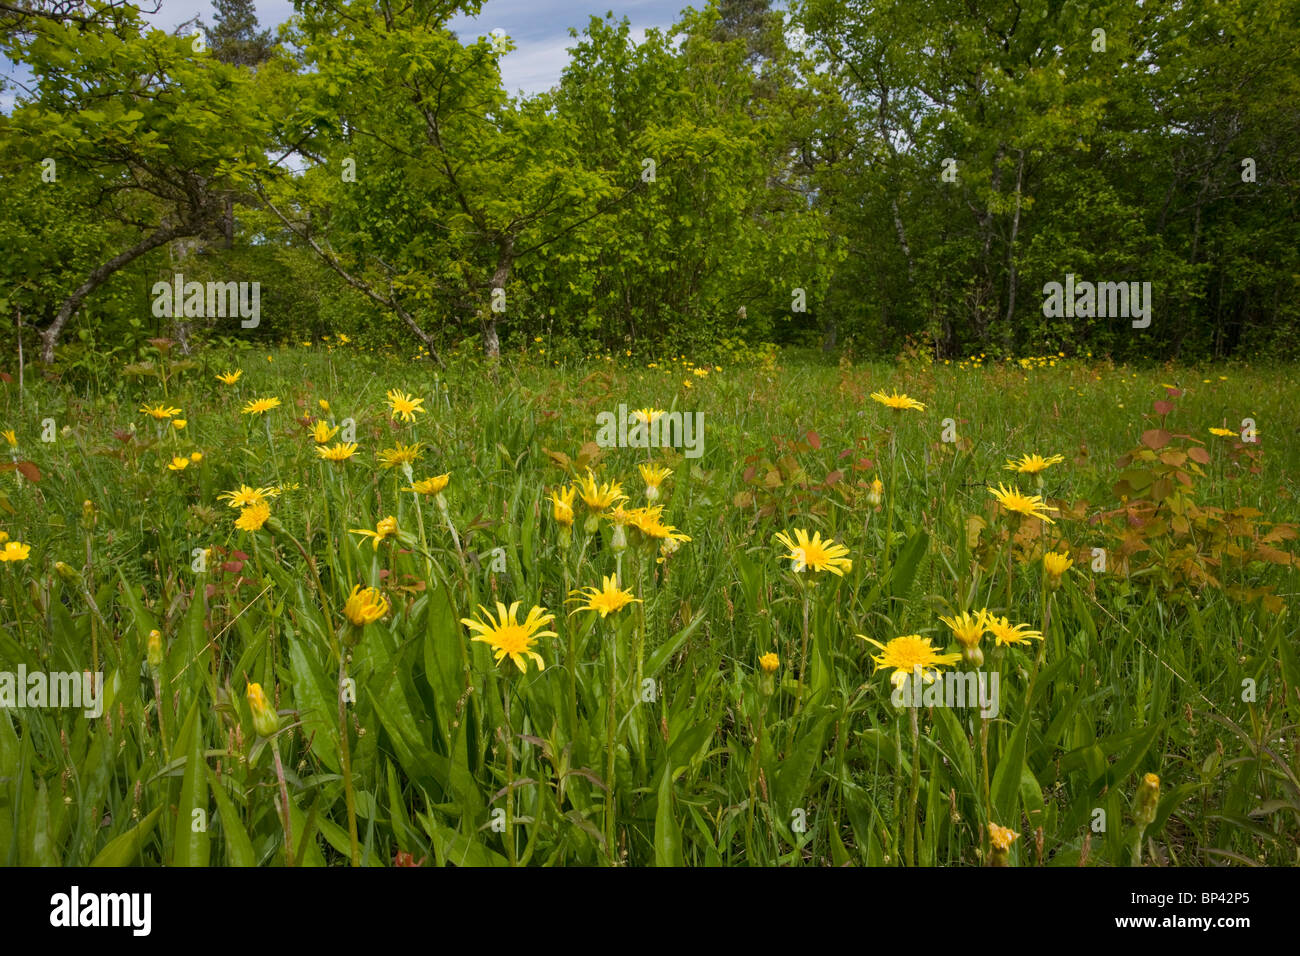 Viper's-grass in grassland in beautiful ancient flowery wood pasture or wooded meadow at Loode Oakwood or Oak Grove, Saarema Stock Photo